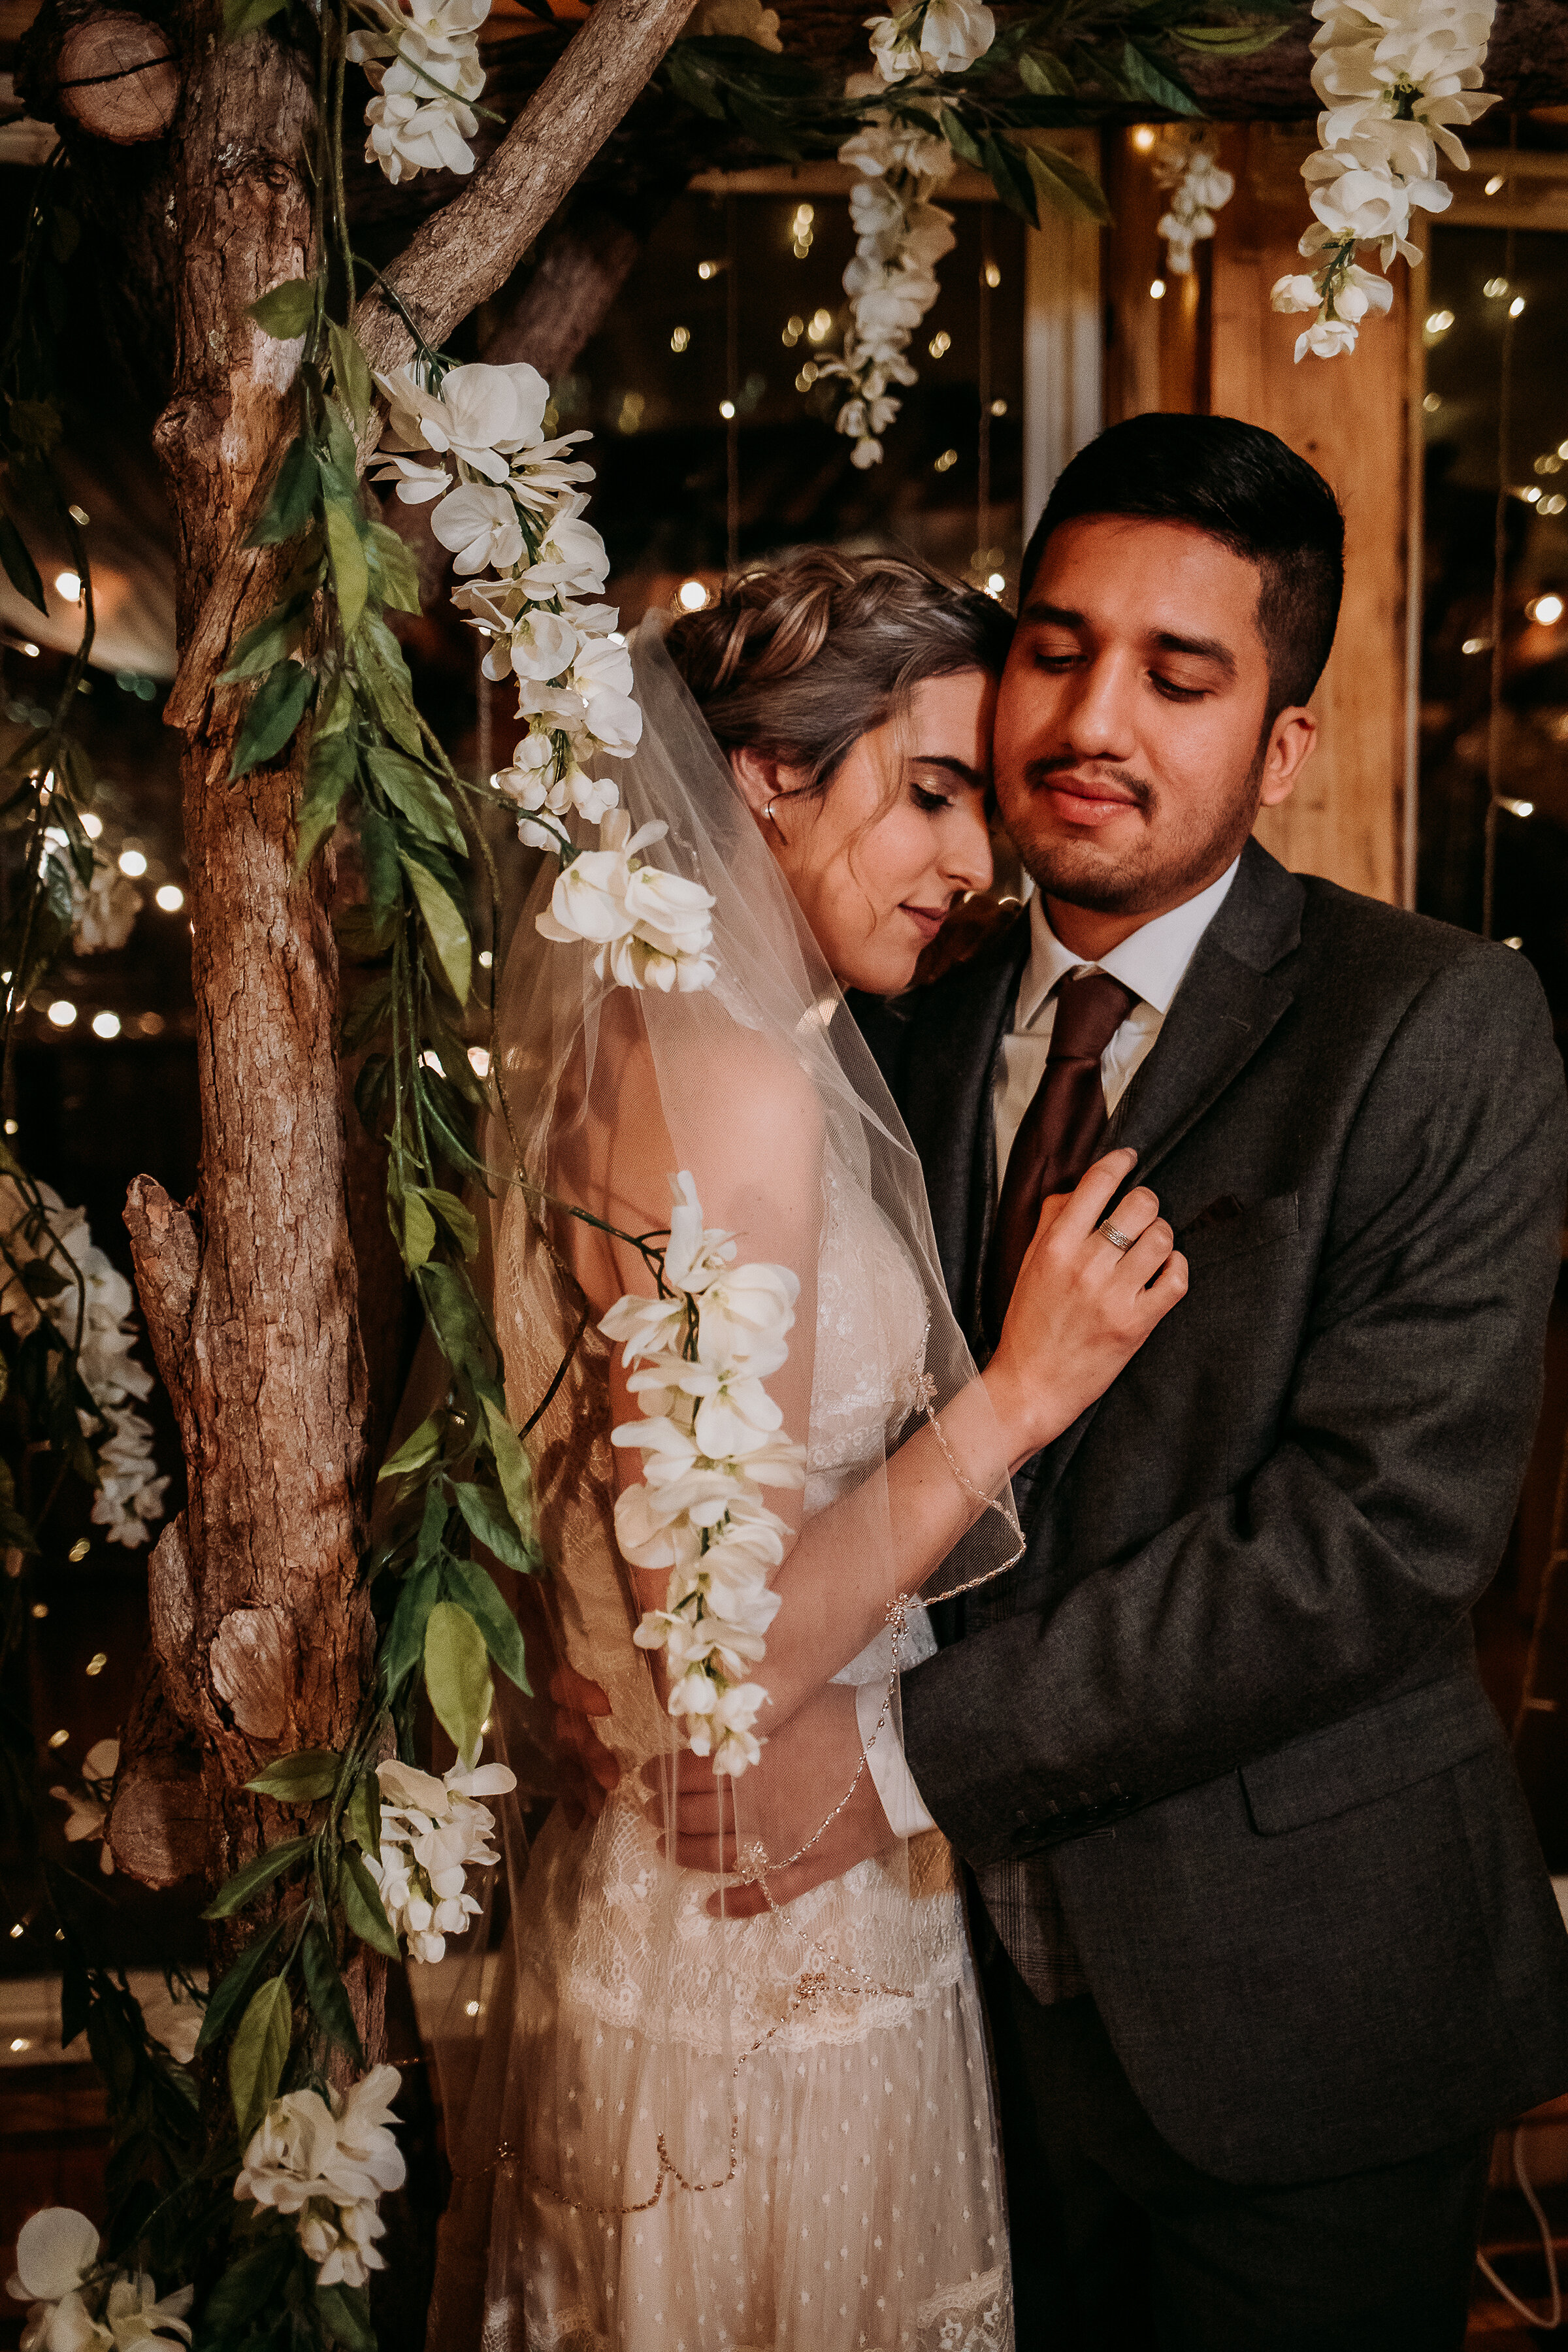  Kindred + Co. Photography captures romantic evening elopement moments at this treehouse wedding at Akron, Ohio. treehouse wedding, elopement photographer, akron ohio, The Grand Barn at the Mohicans, bohemian lace wedding dress, natural wedding makeu